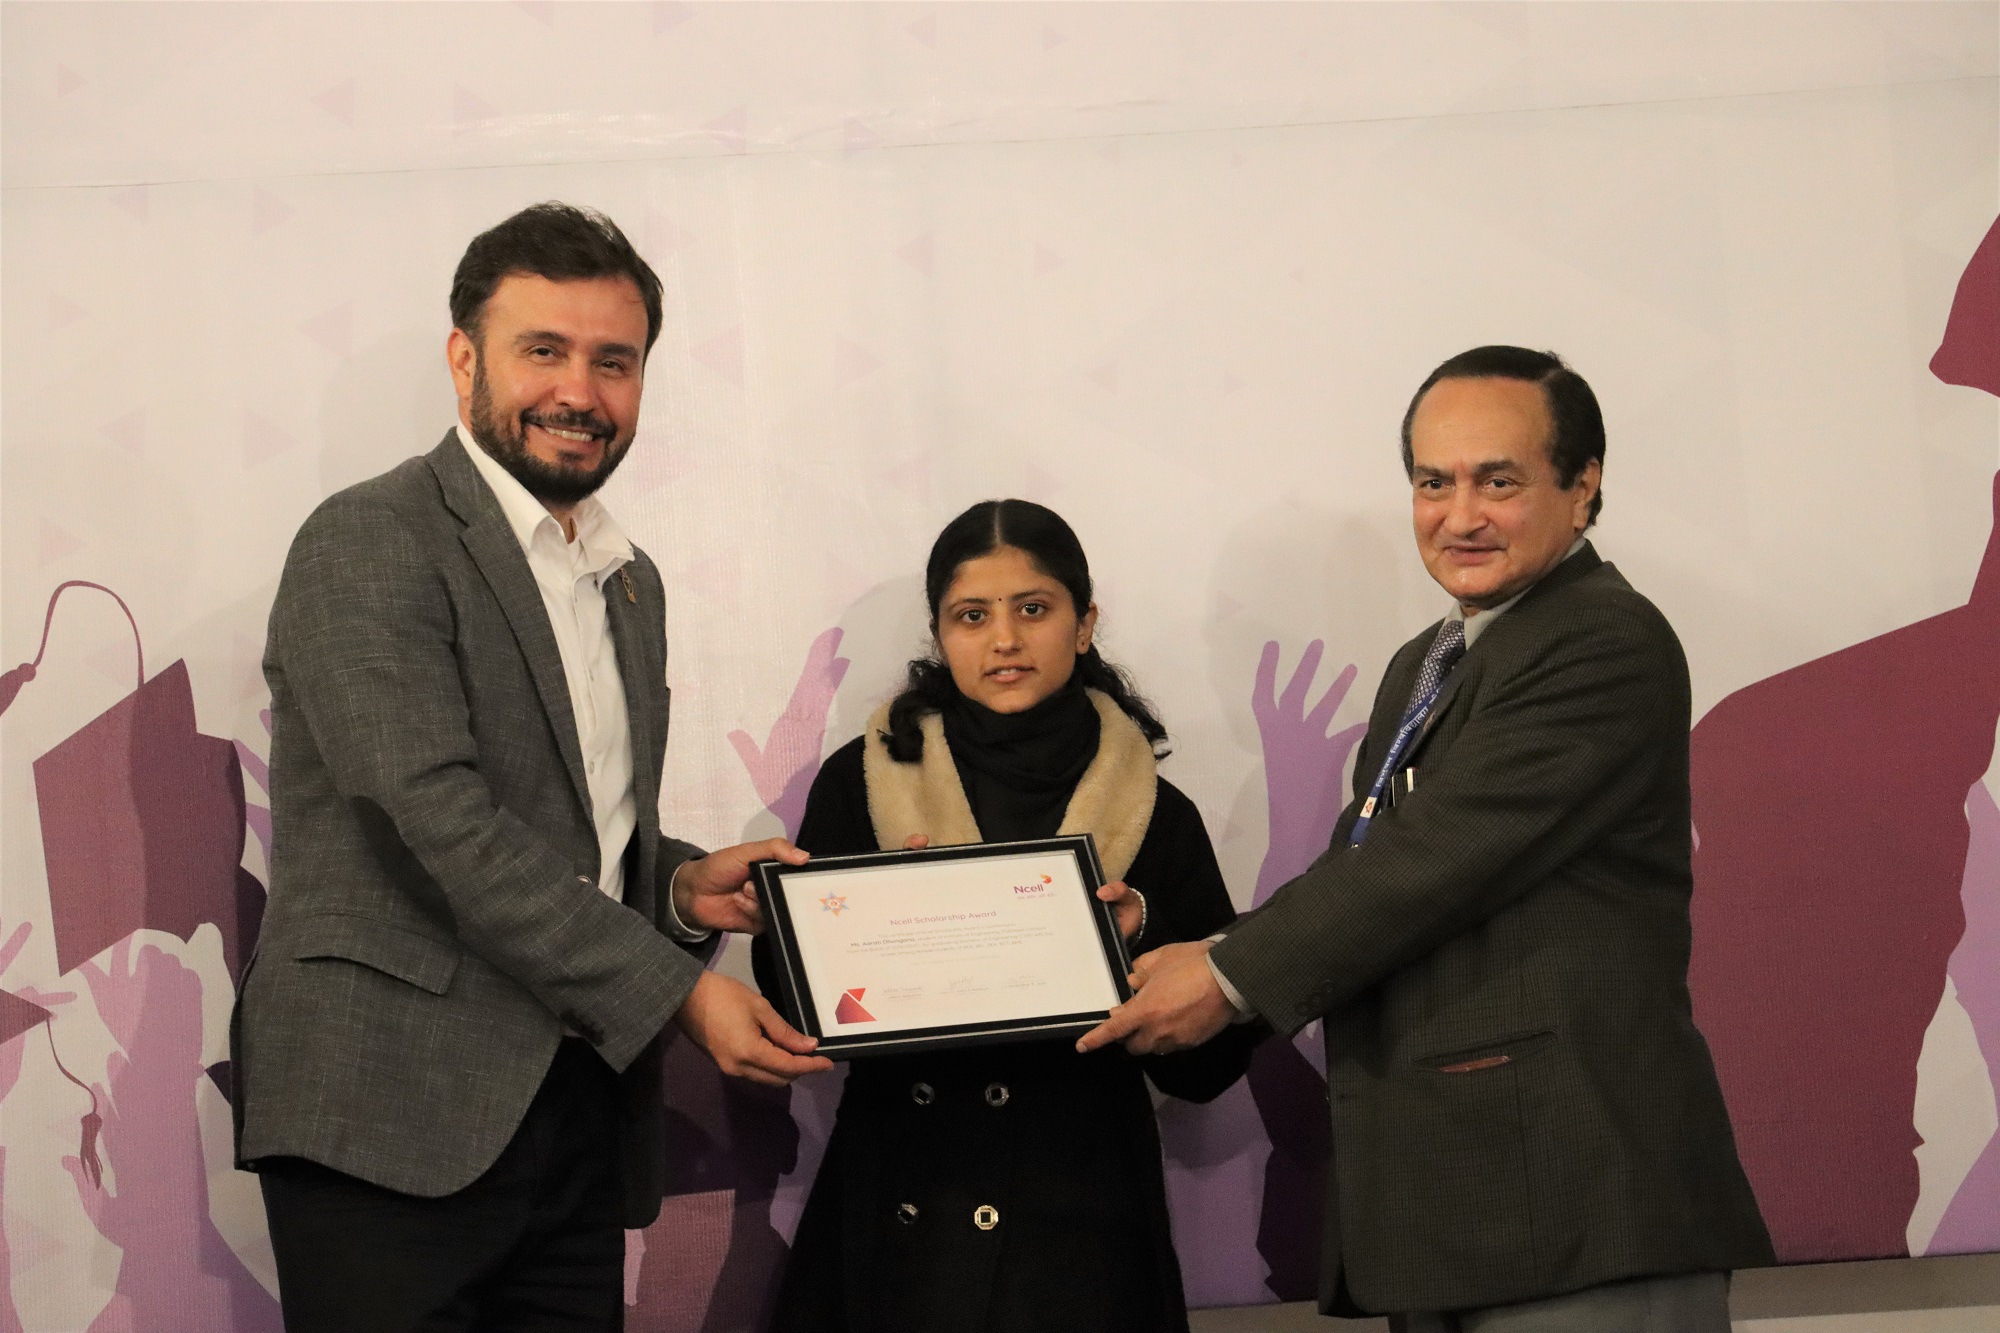 Ncell marks 10 years of scholarships, recognizes Pulchowk Campus excellence